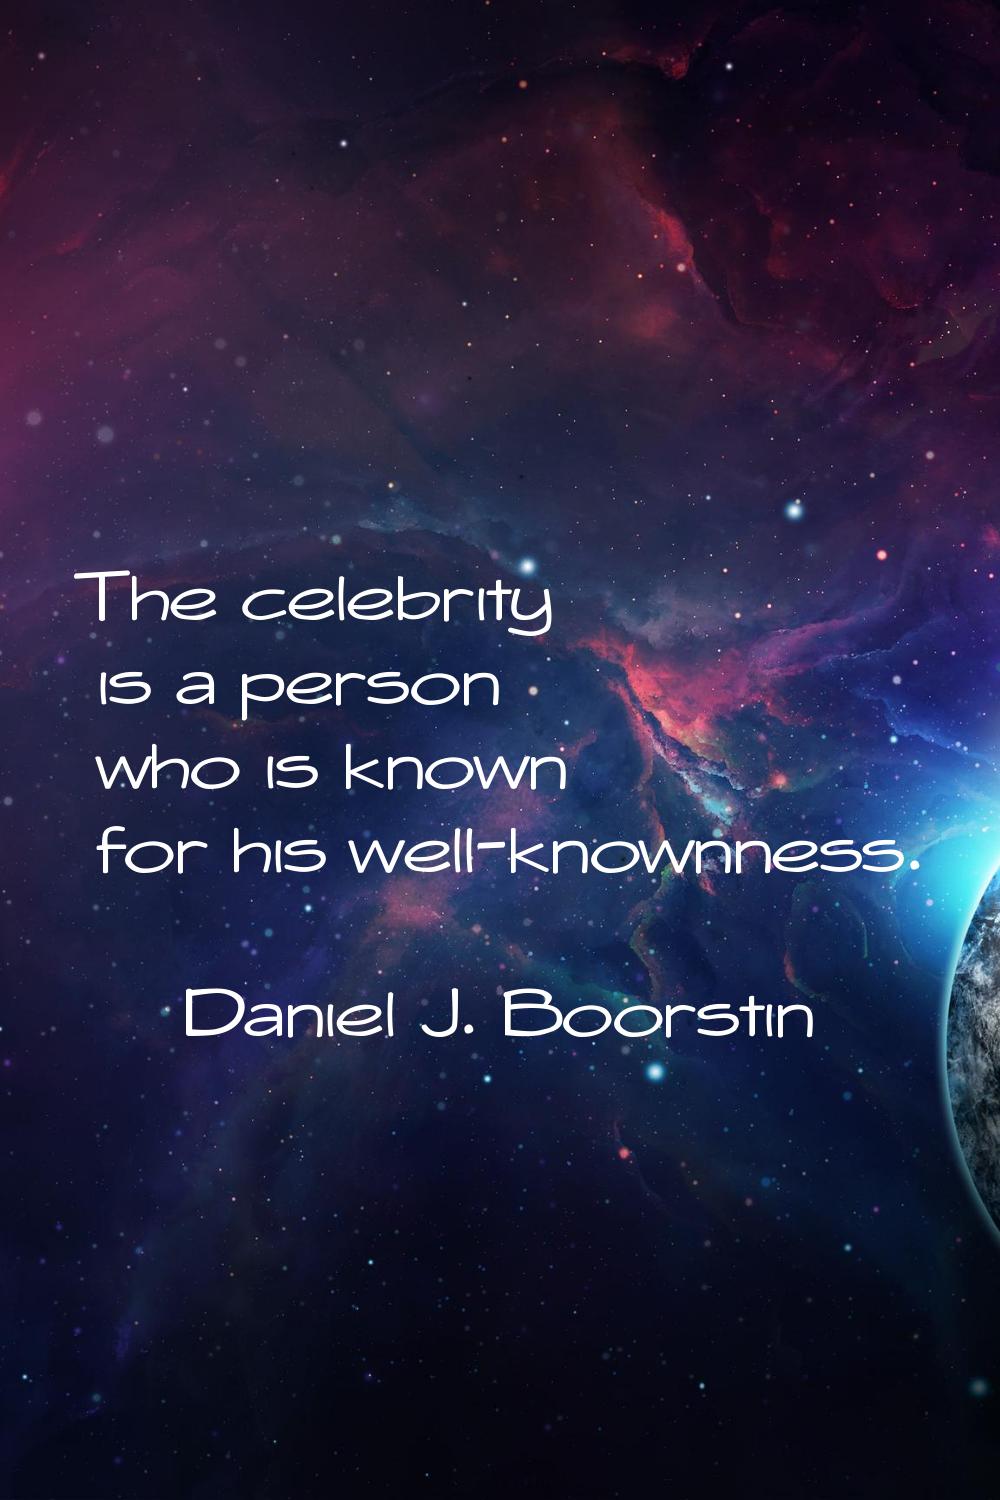 The celebrity is a person who is known for his well-knownness.